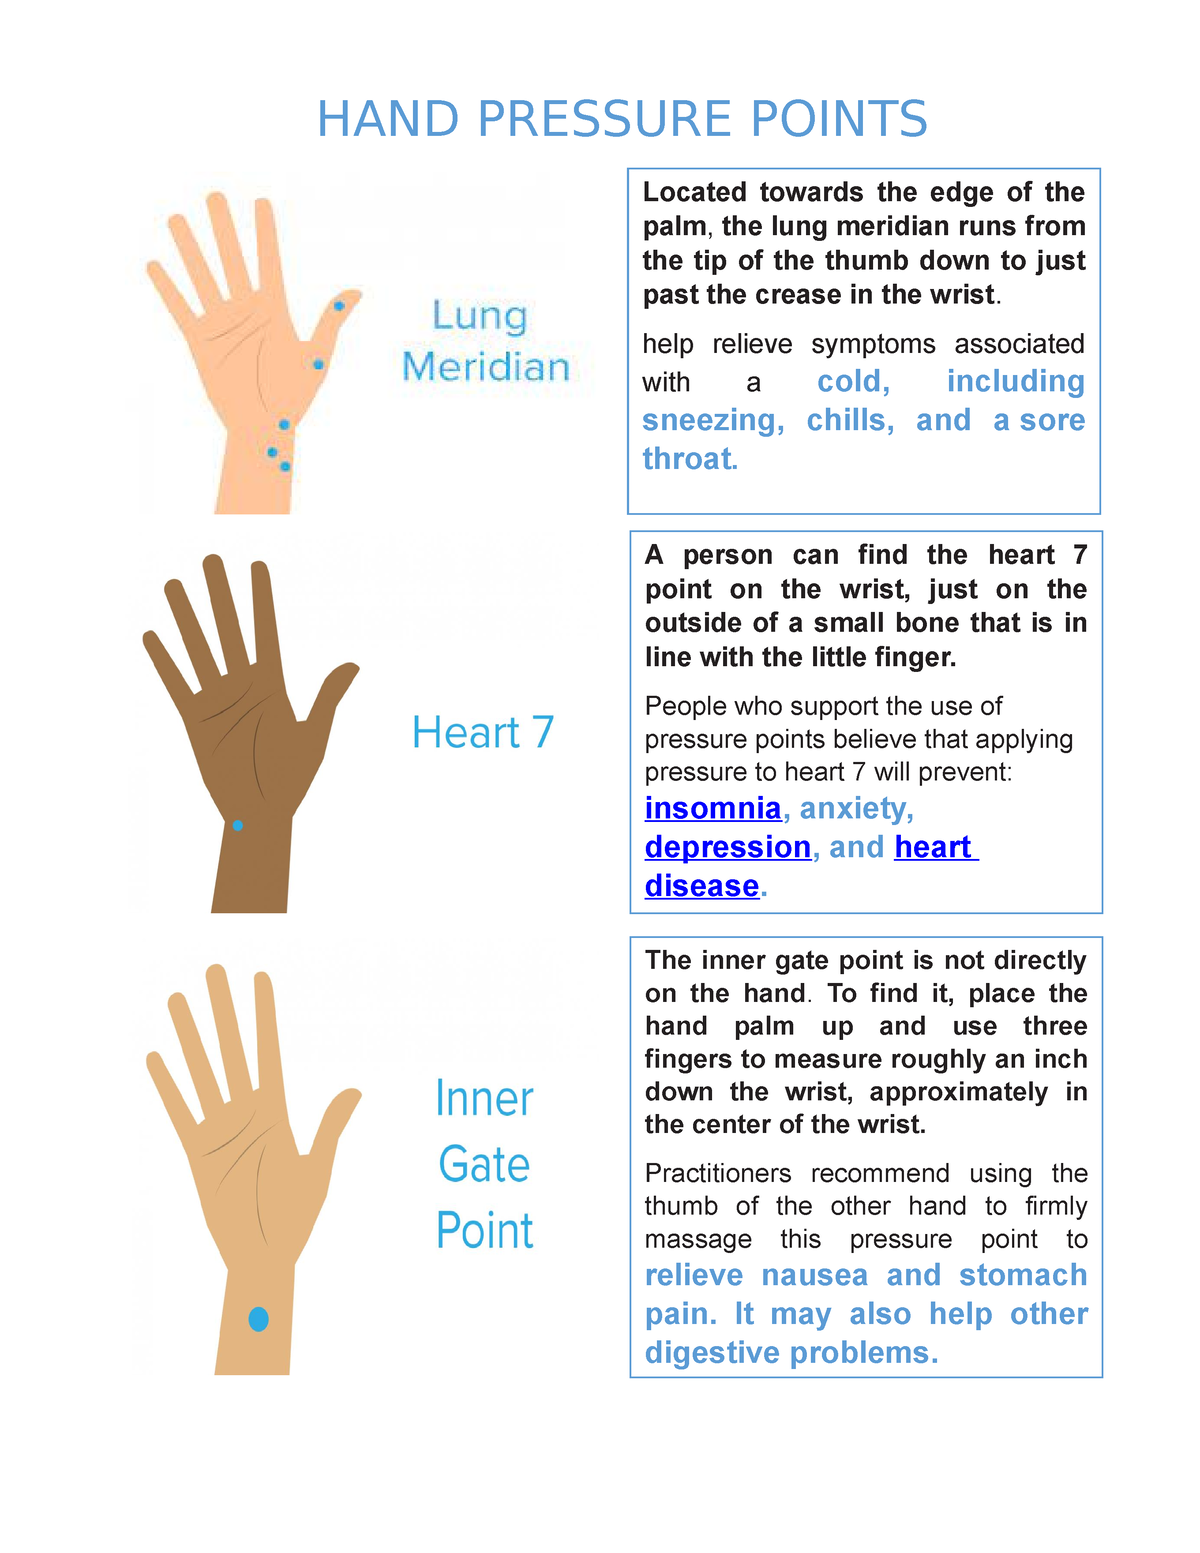 6 Important Pressure Points Human Body | Acupuncture Treatment | Acupressure  Points - YouTube